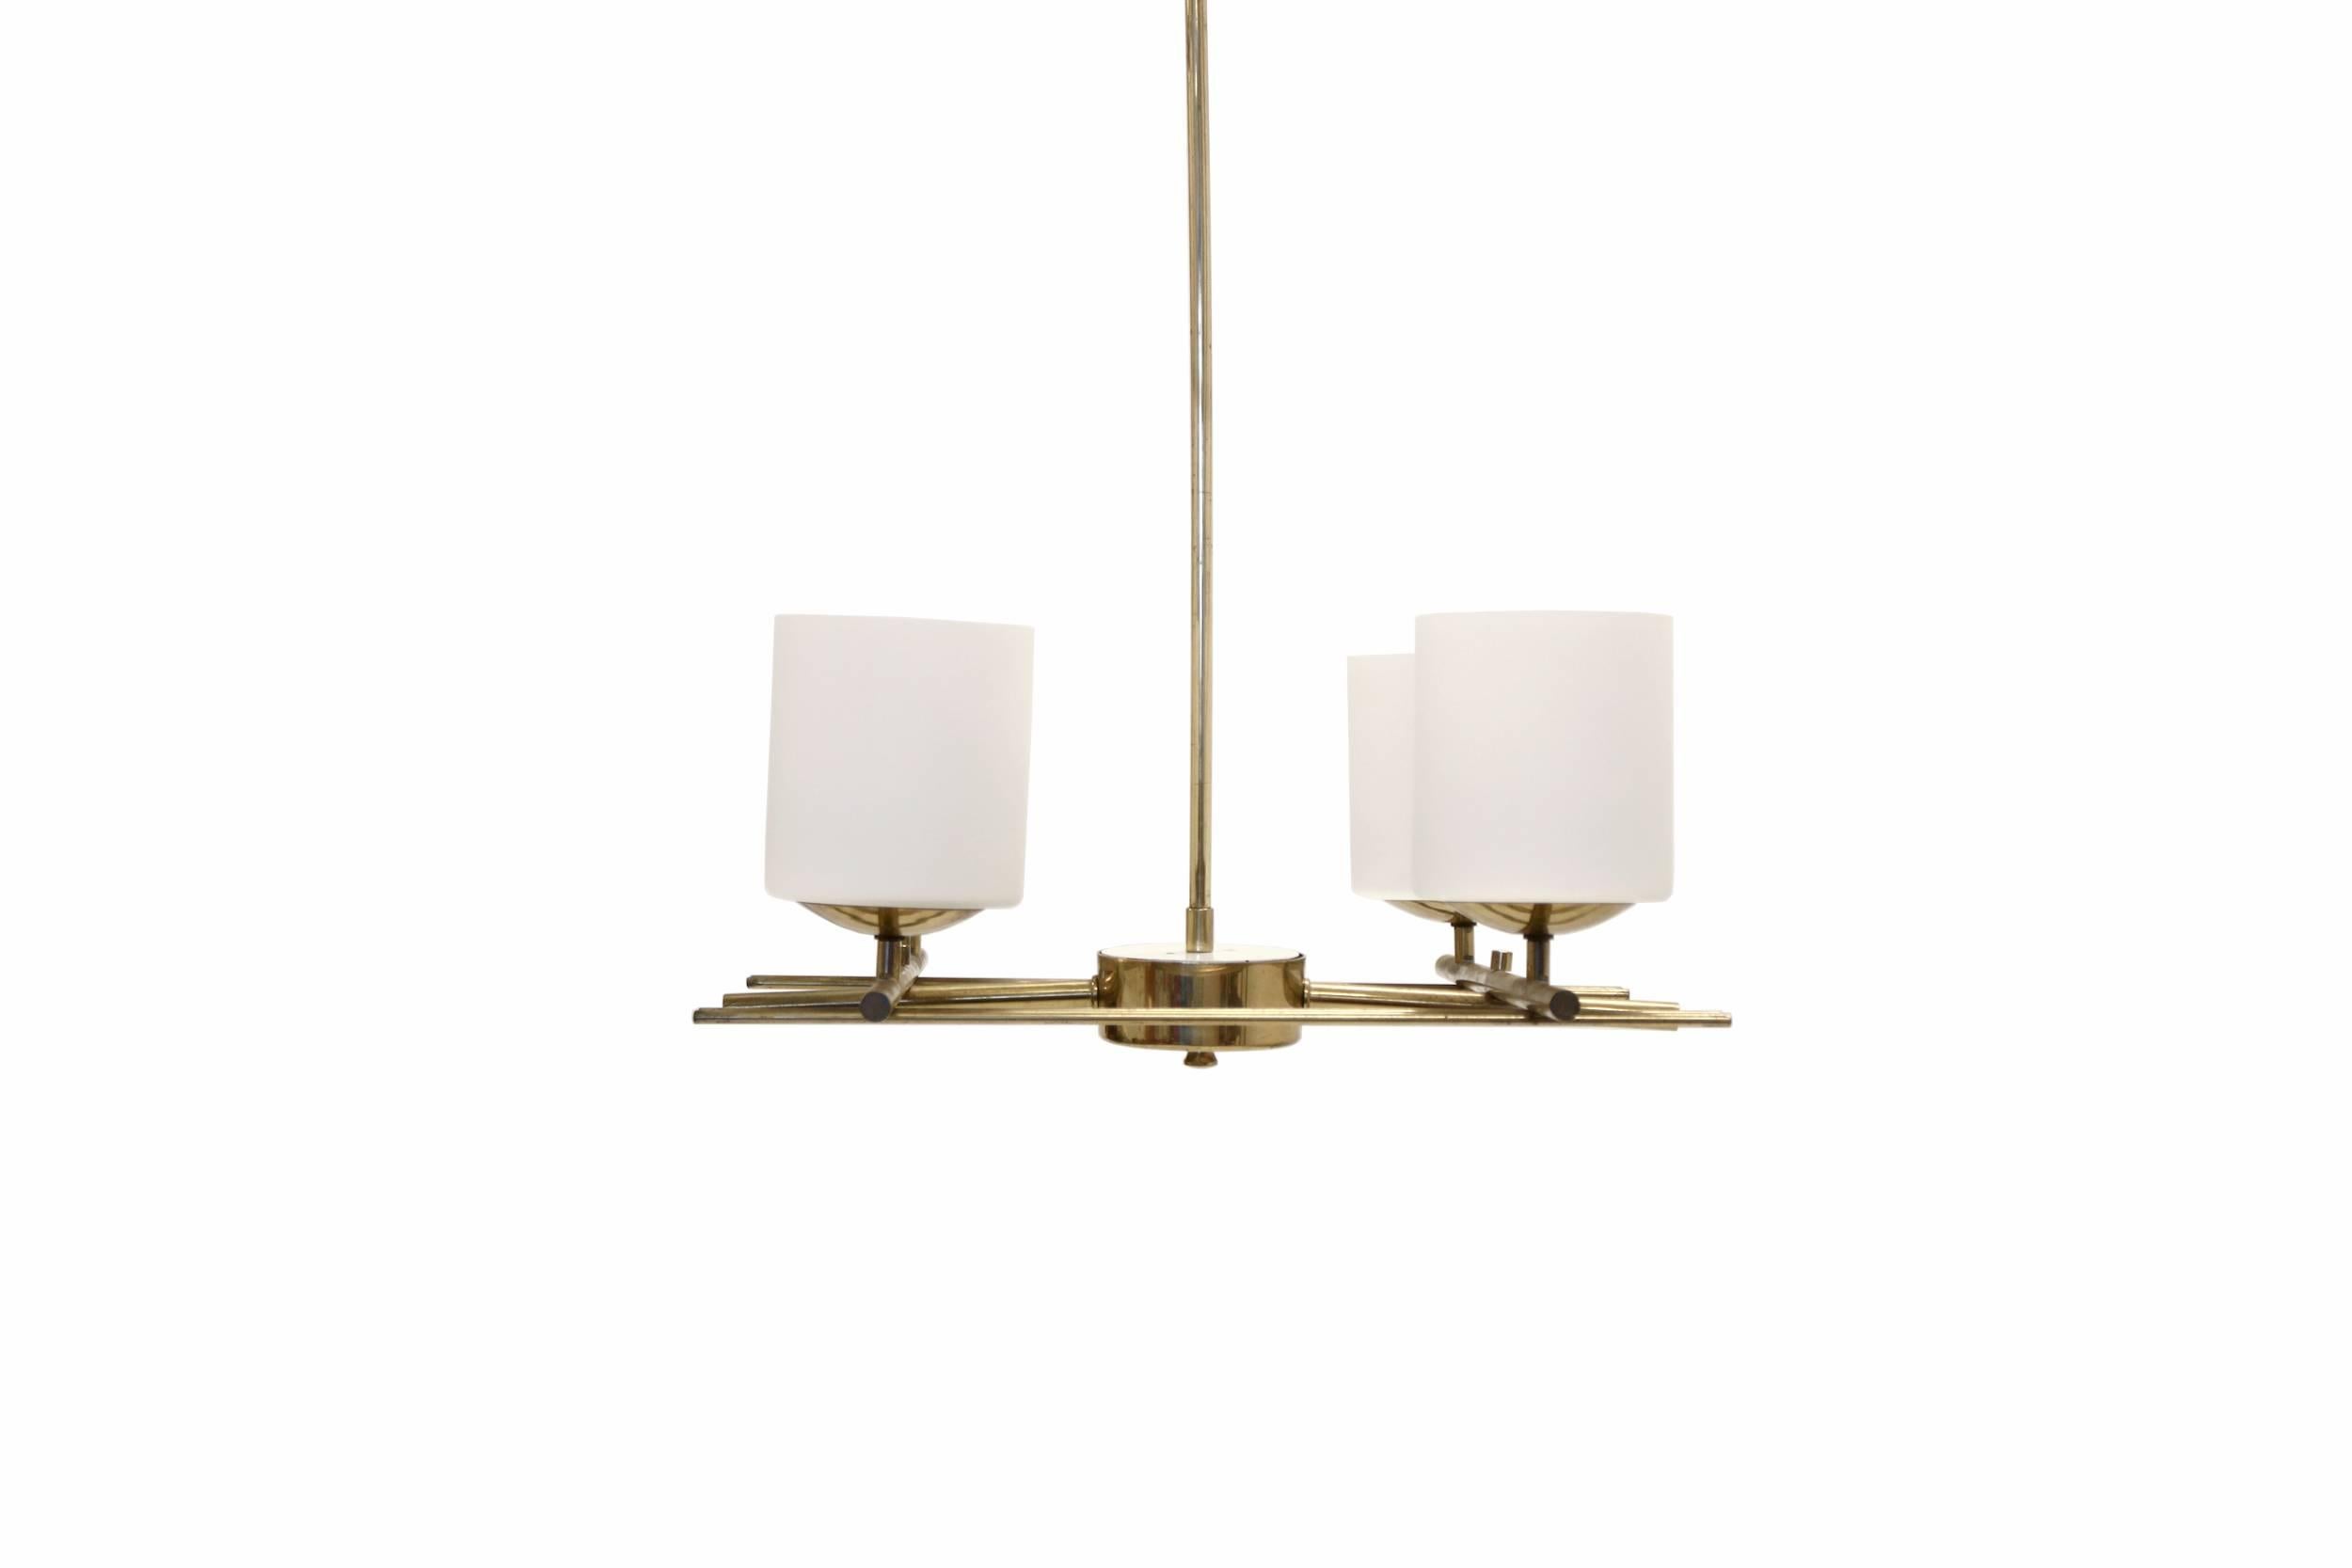 Modernist and visually striking four-armed chandelier in brass and opaline glass. Designed and manufactured in Finland by Itsu, circa 1960 first half. The lamp is fully working and in excellent vintage condition.